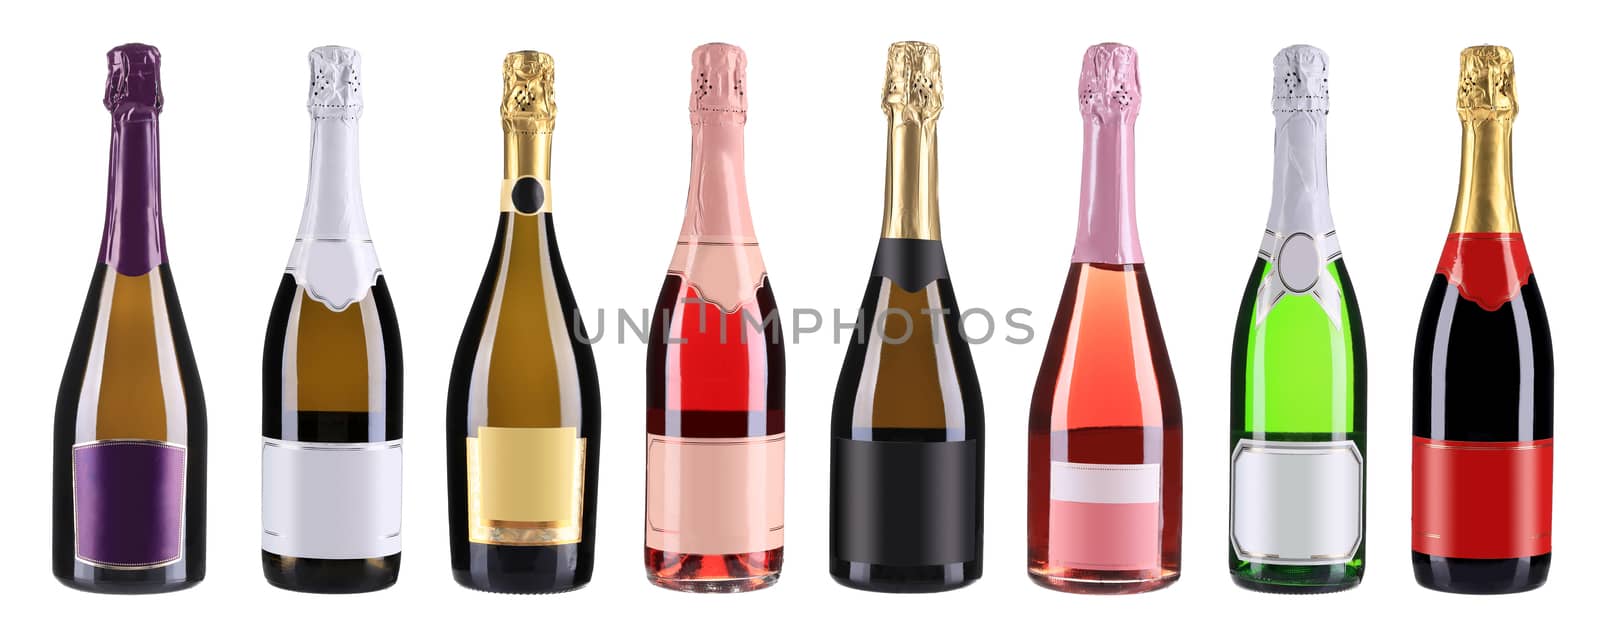 Bottles of champagne in a row. Collage. Isolated on a white background.